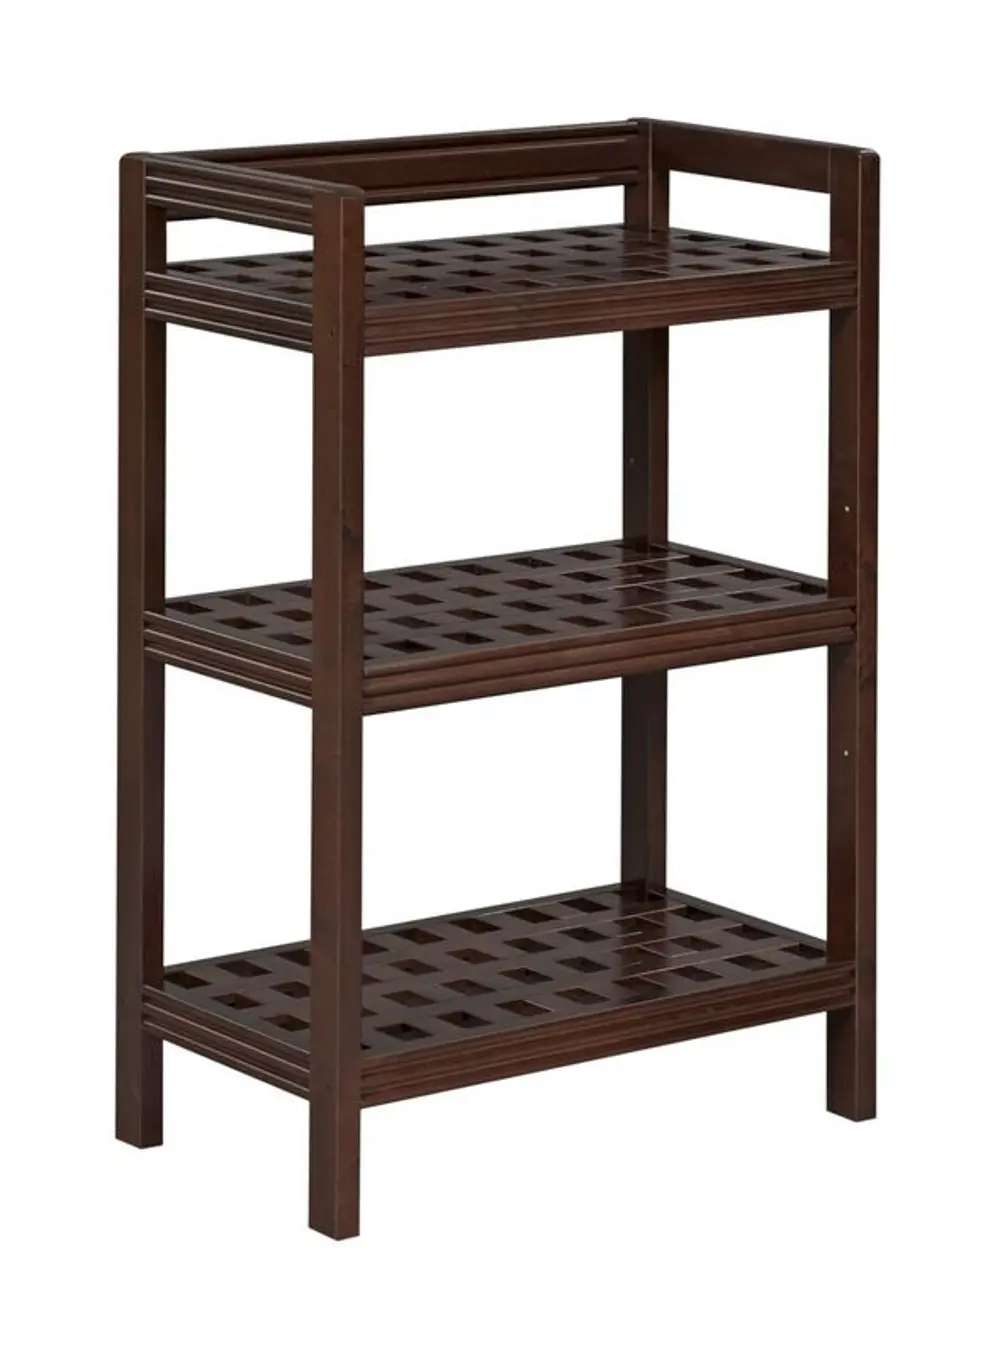 Merlot Low Bookcase/Media Tower - Beaumont-1